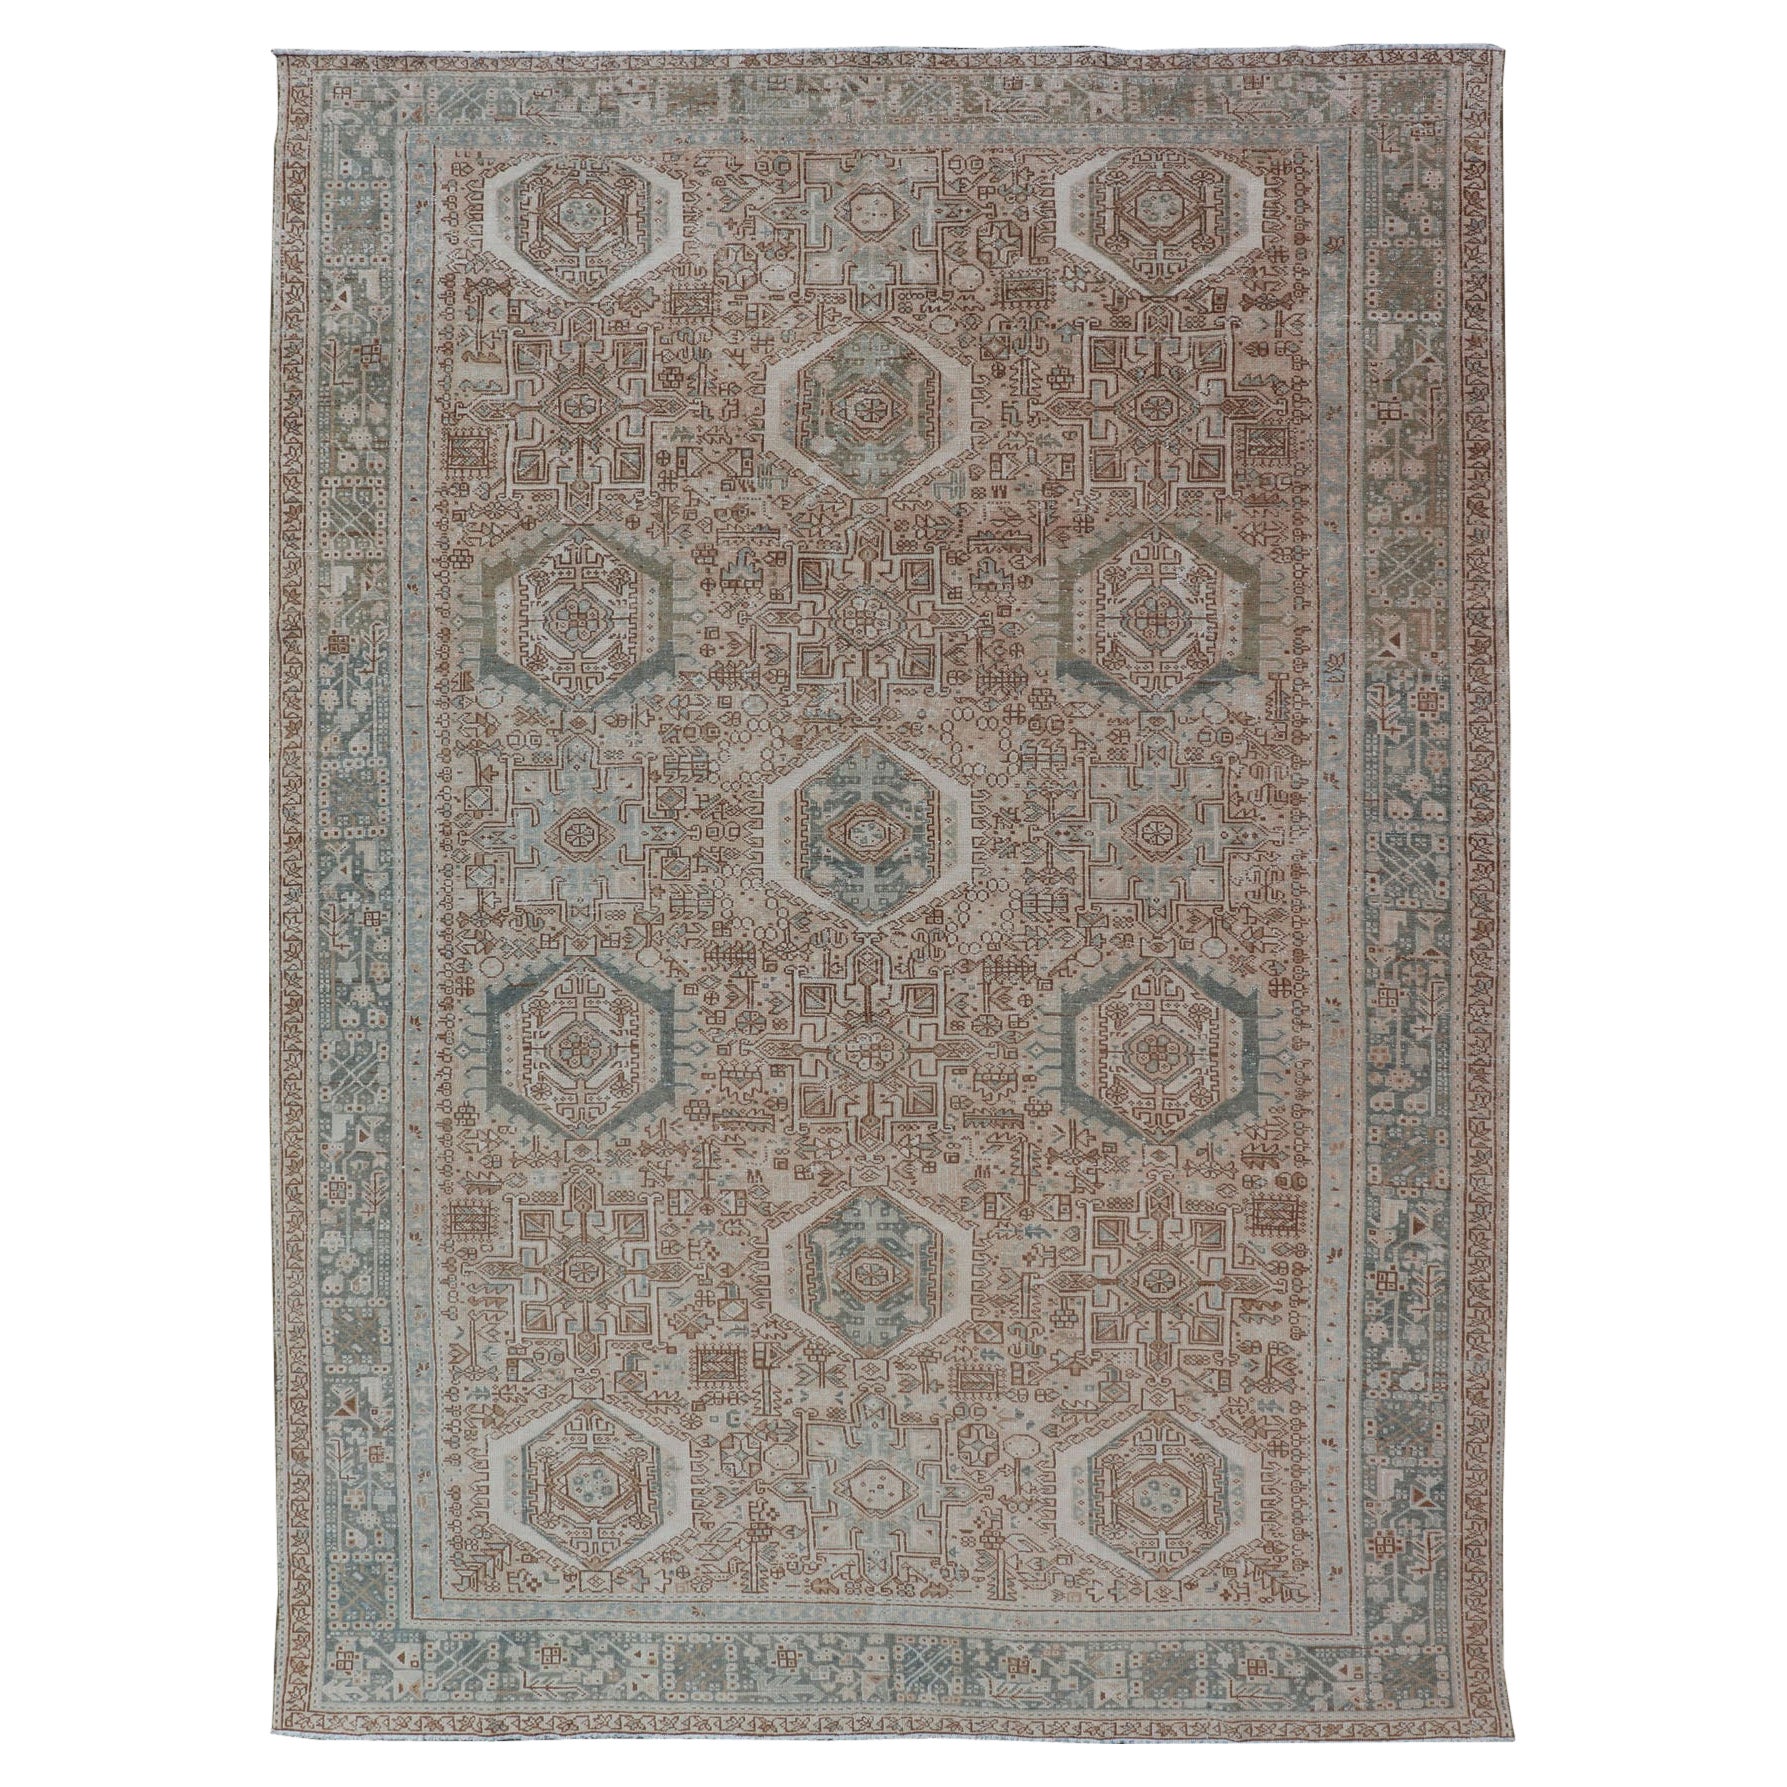 Vintage Persian Heriz Rug with All-Over Medallion Design in Tan and Blues